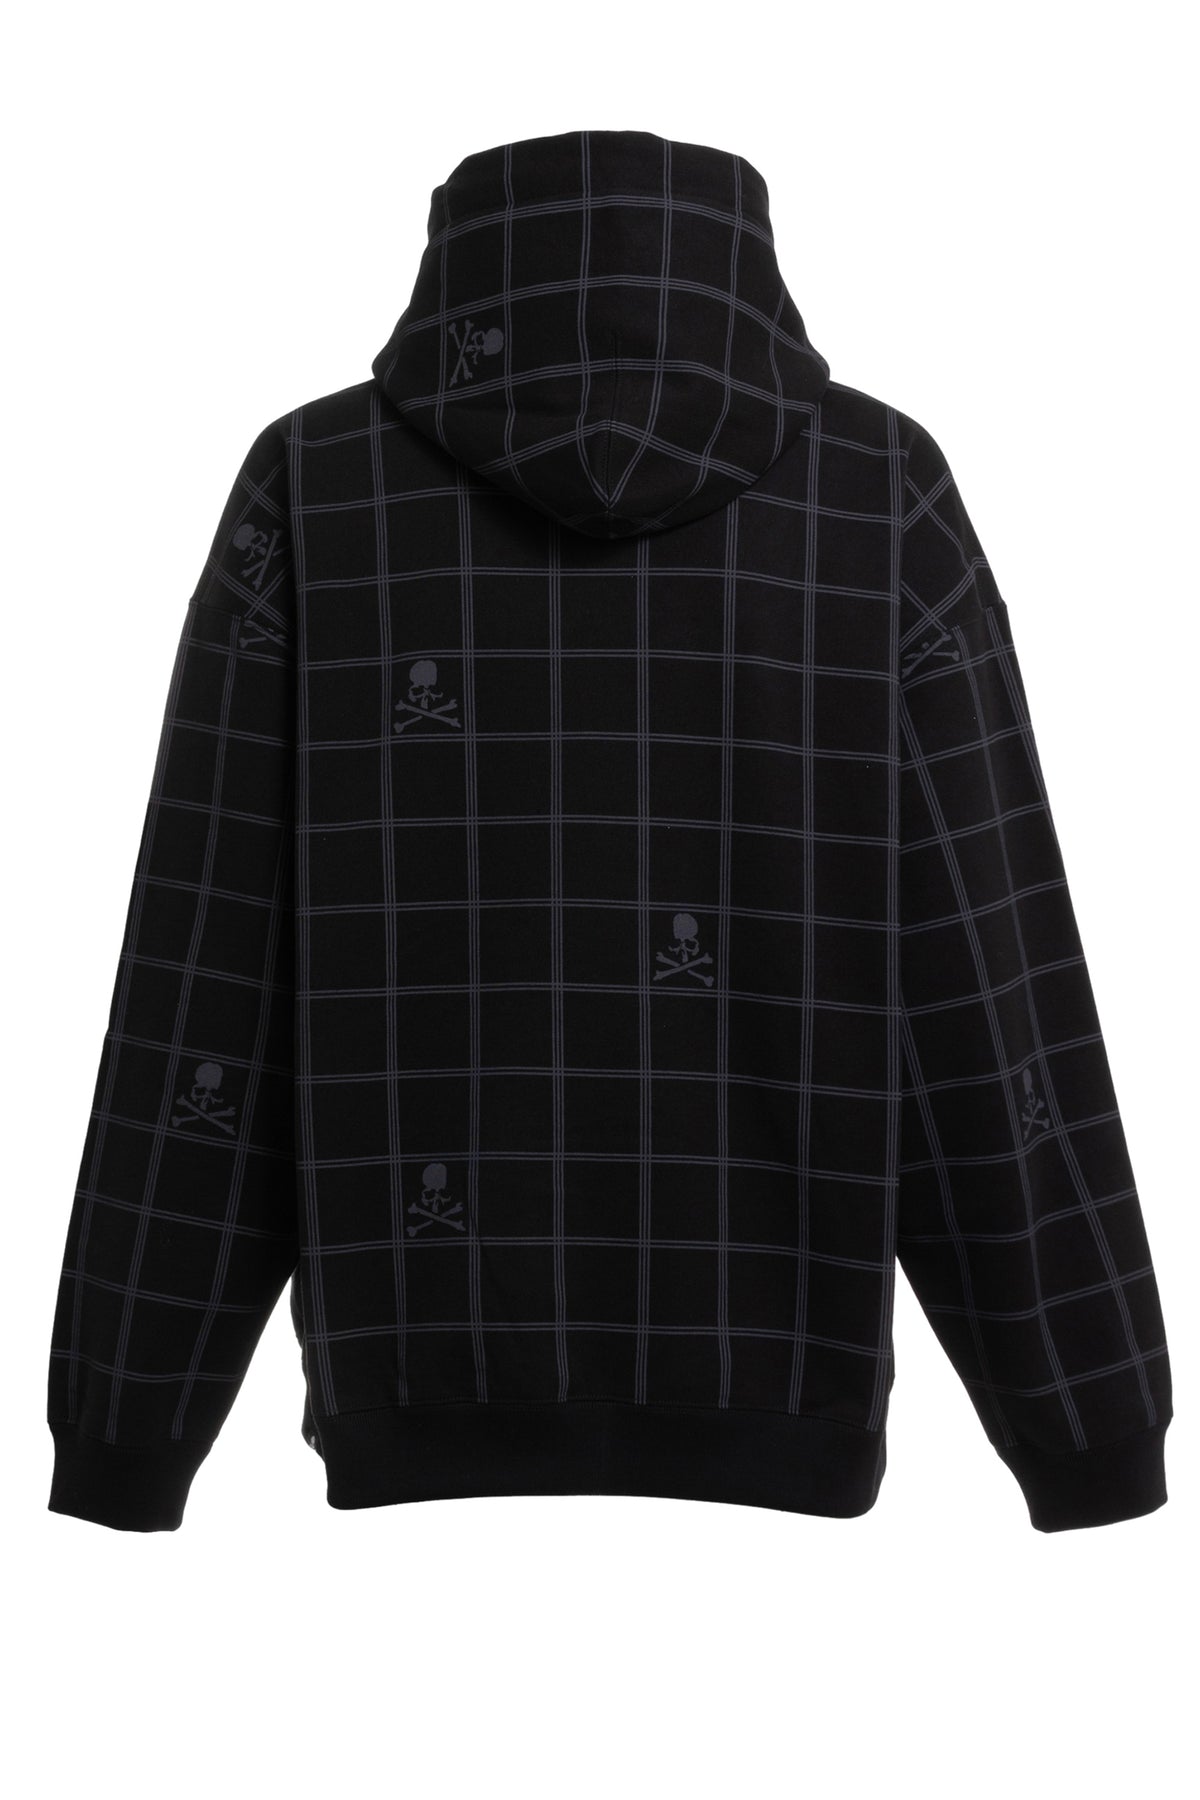 SKULL CHECK HOODIE / BLK GRY